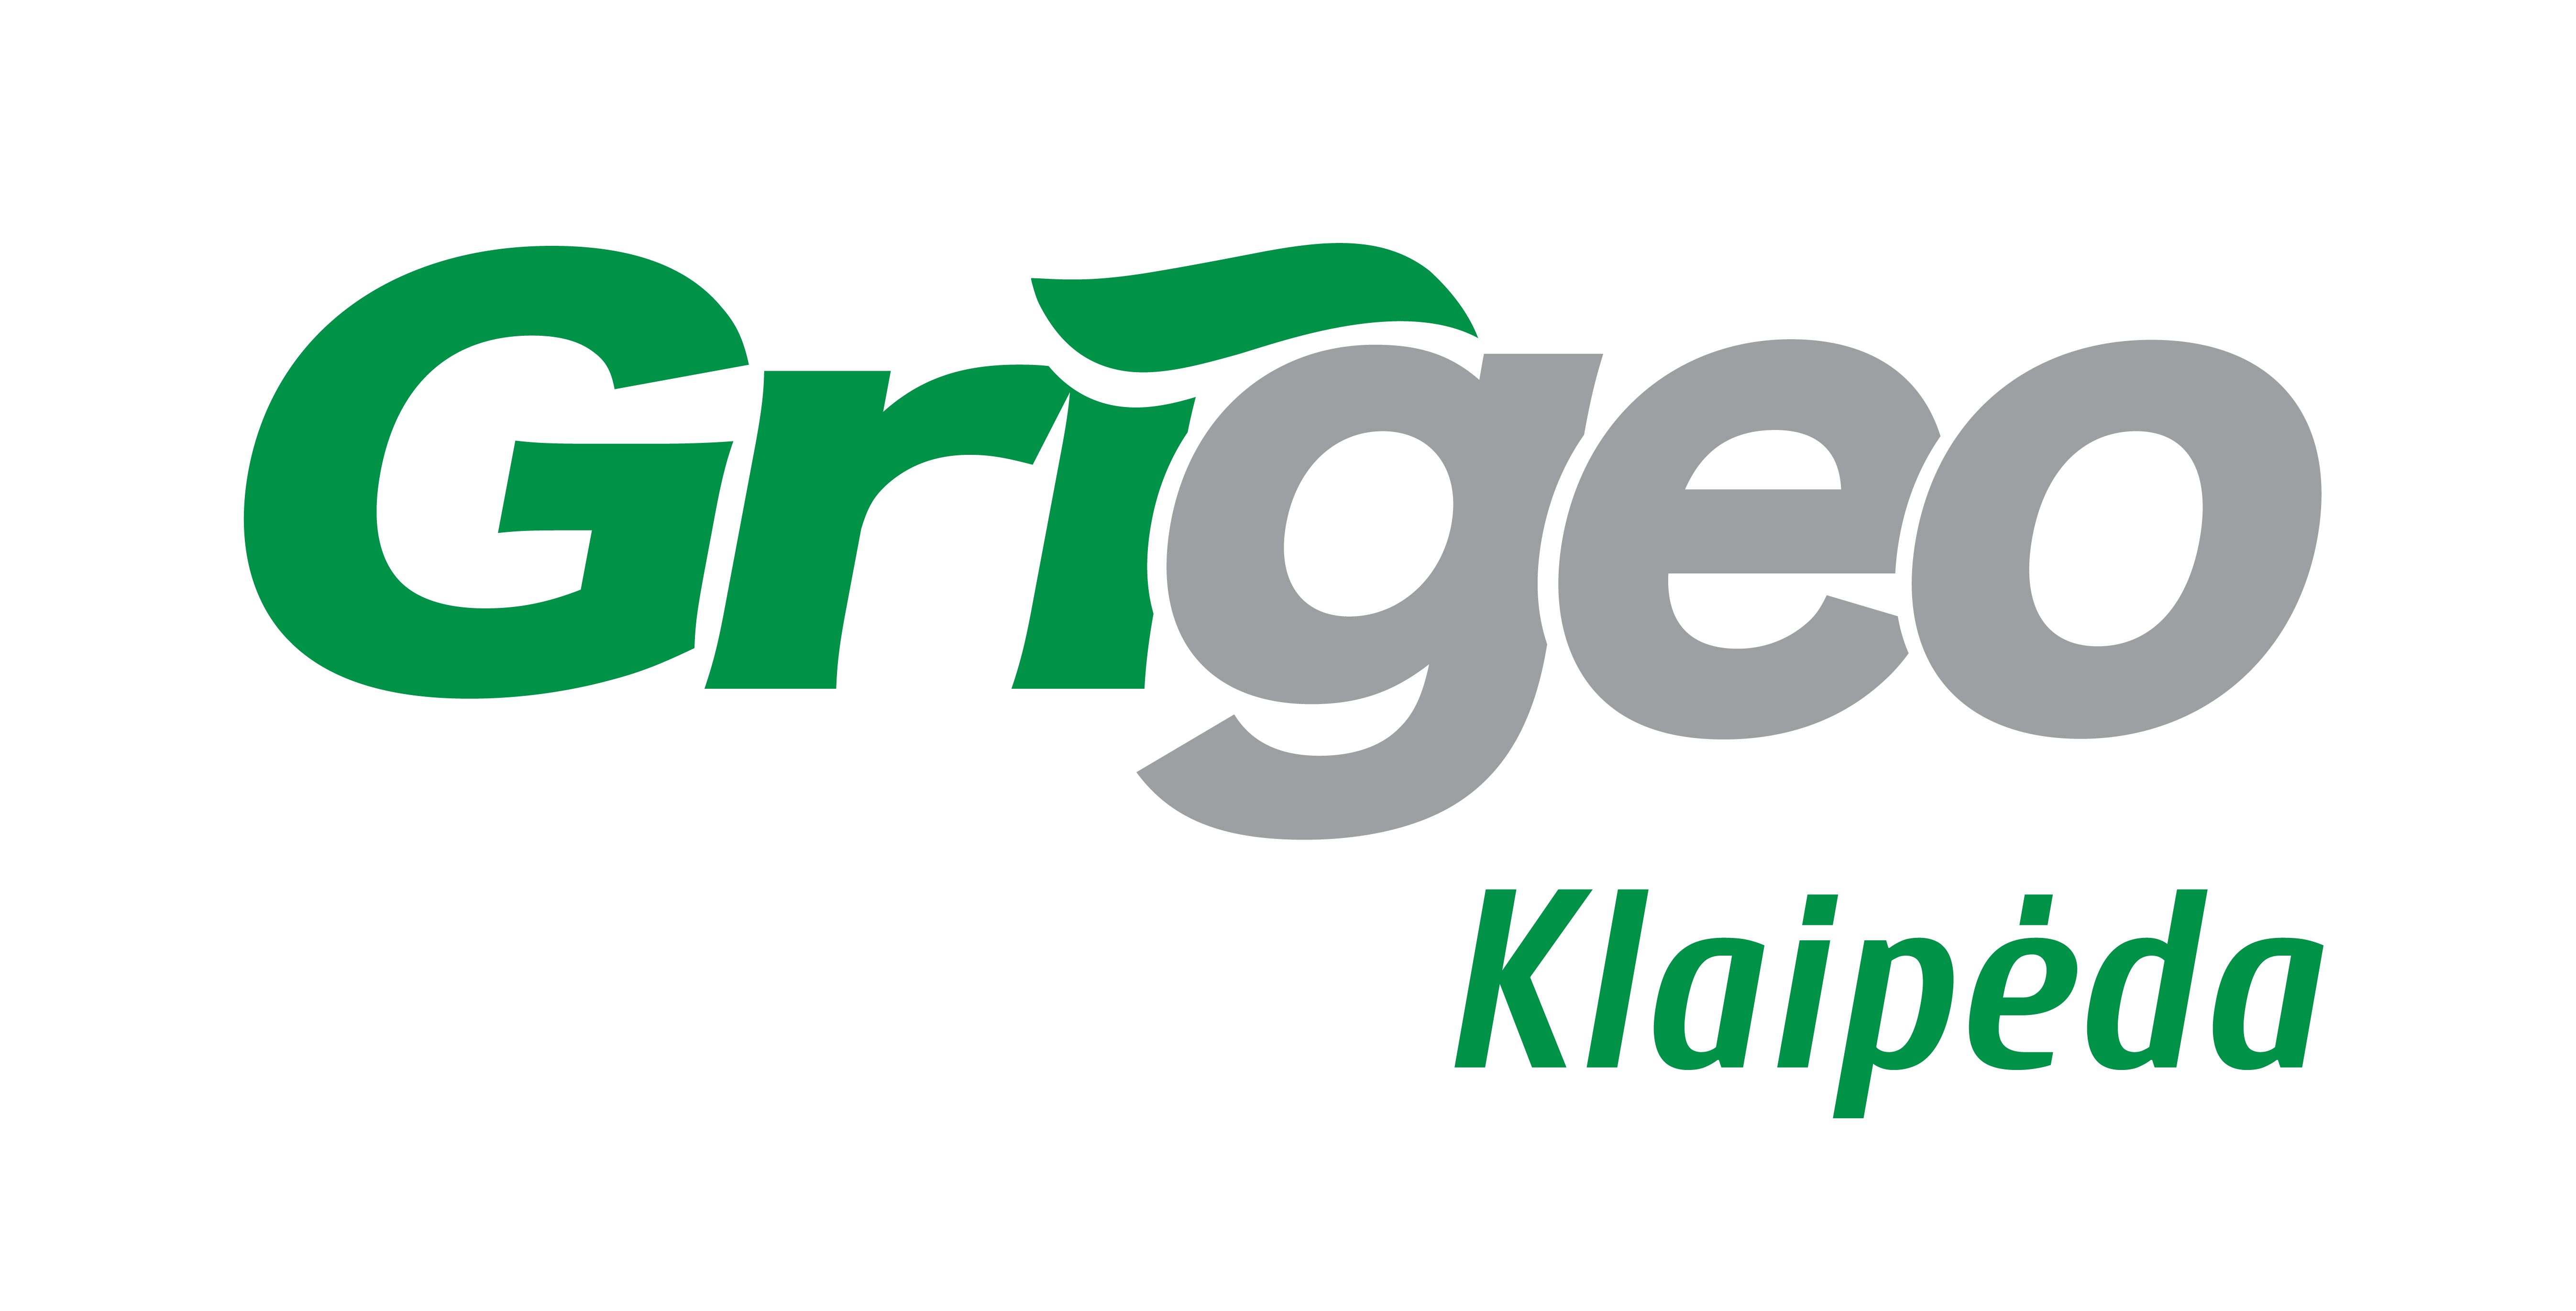 Grigeo Klaipėda is set to have an environmental, occupational health and safety, and operational processes audit carried out